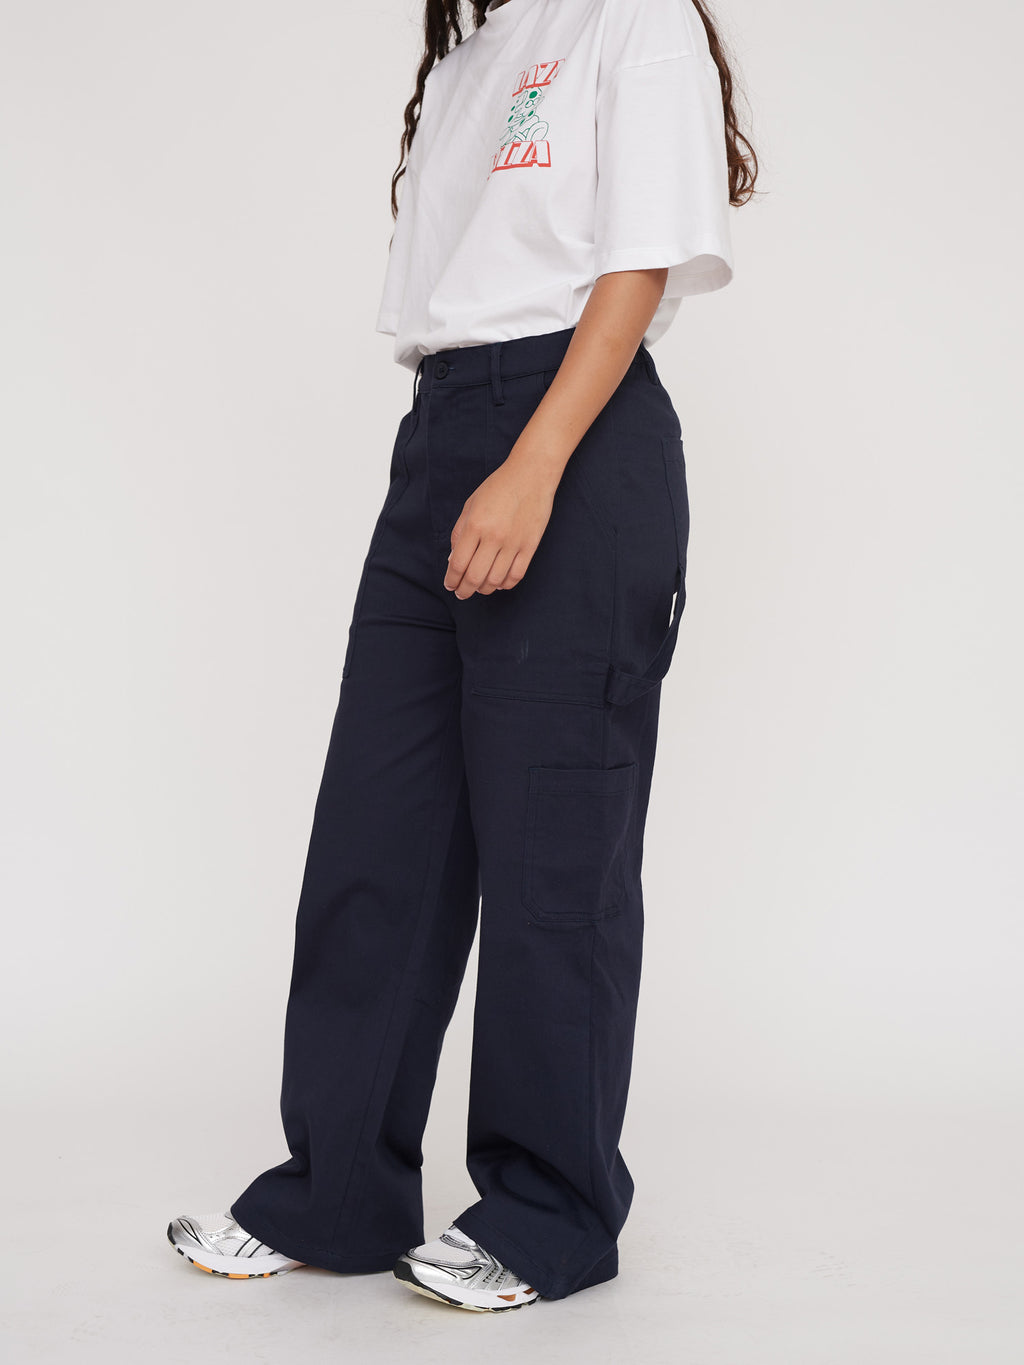 collection-women-landing, collection-women-new-in-1, collection-womens-trousers,collection-oaflet